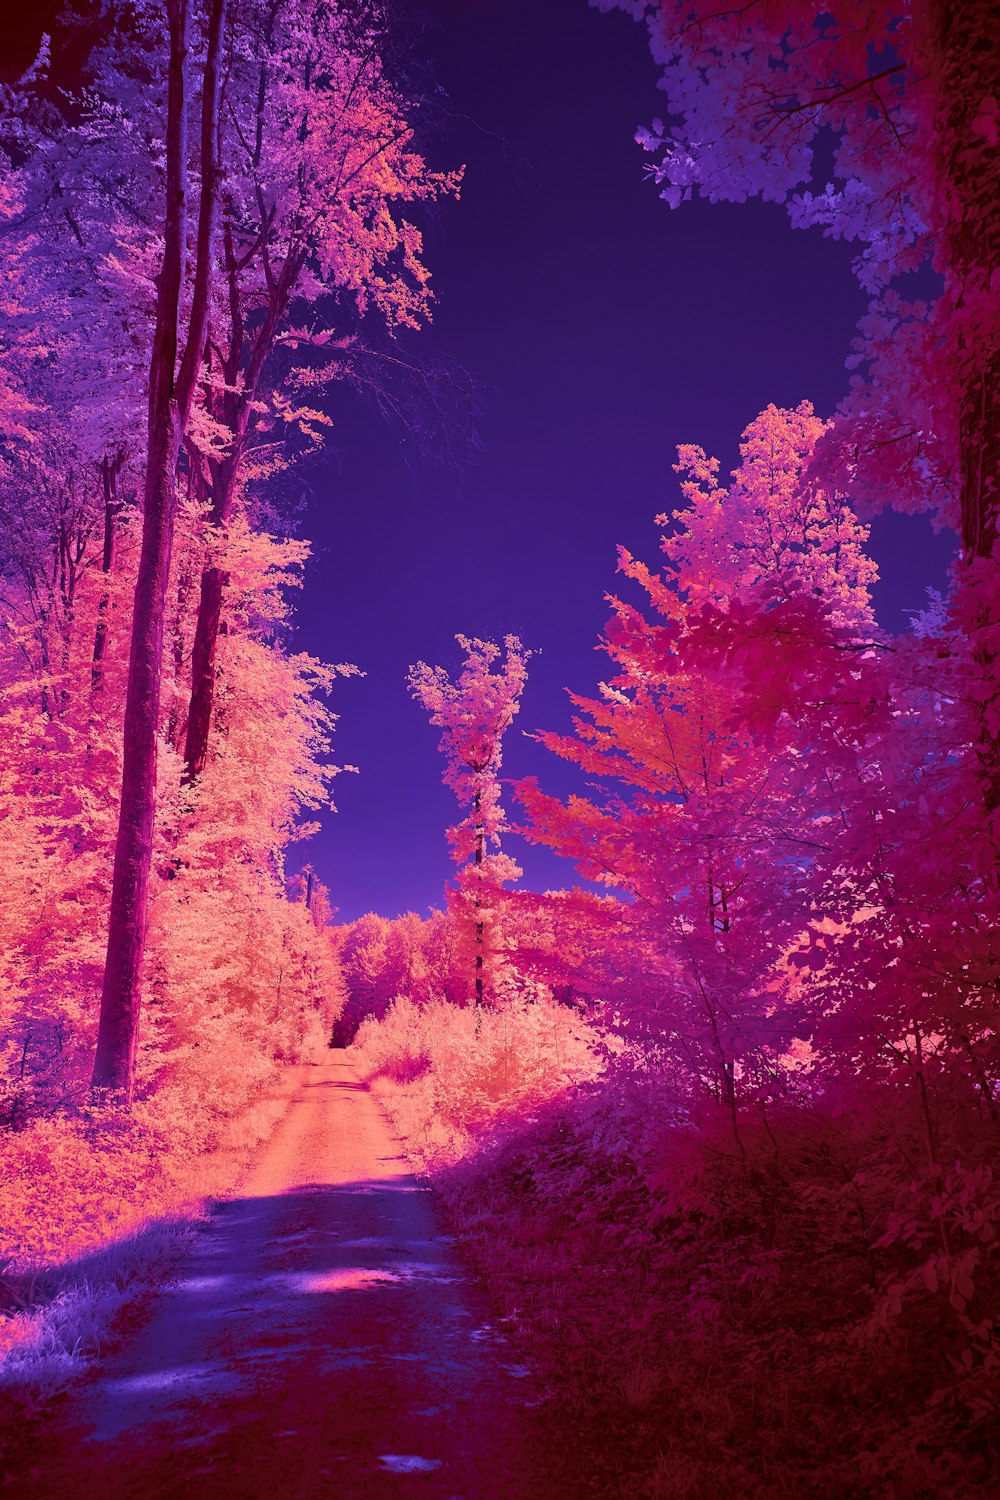 infrared image of a path in the woods